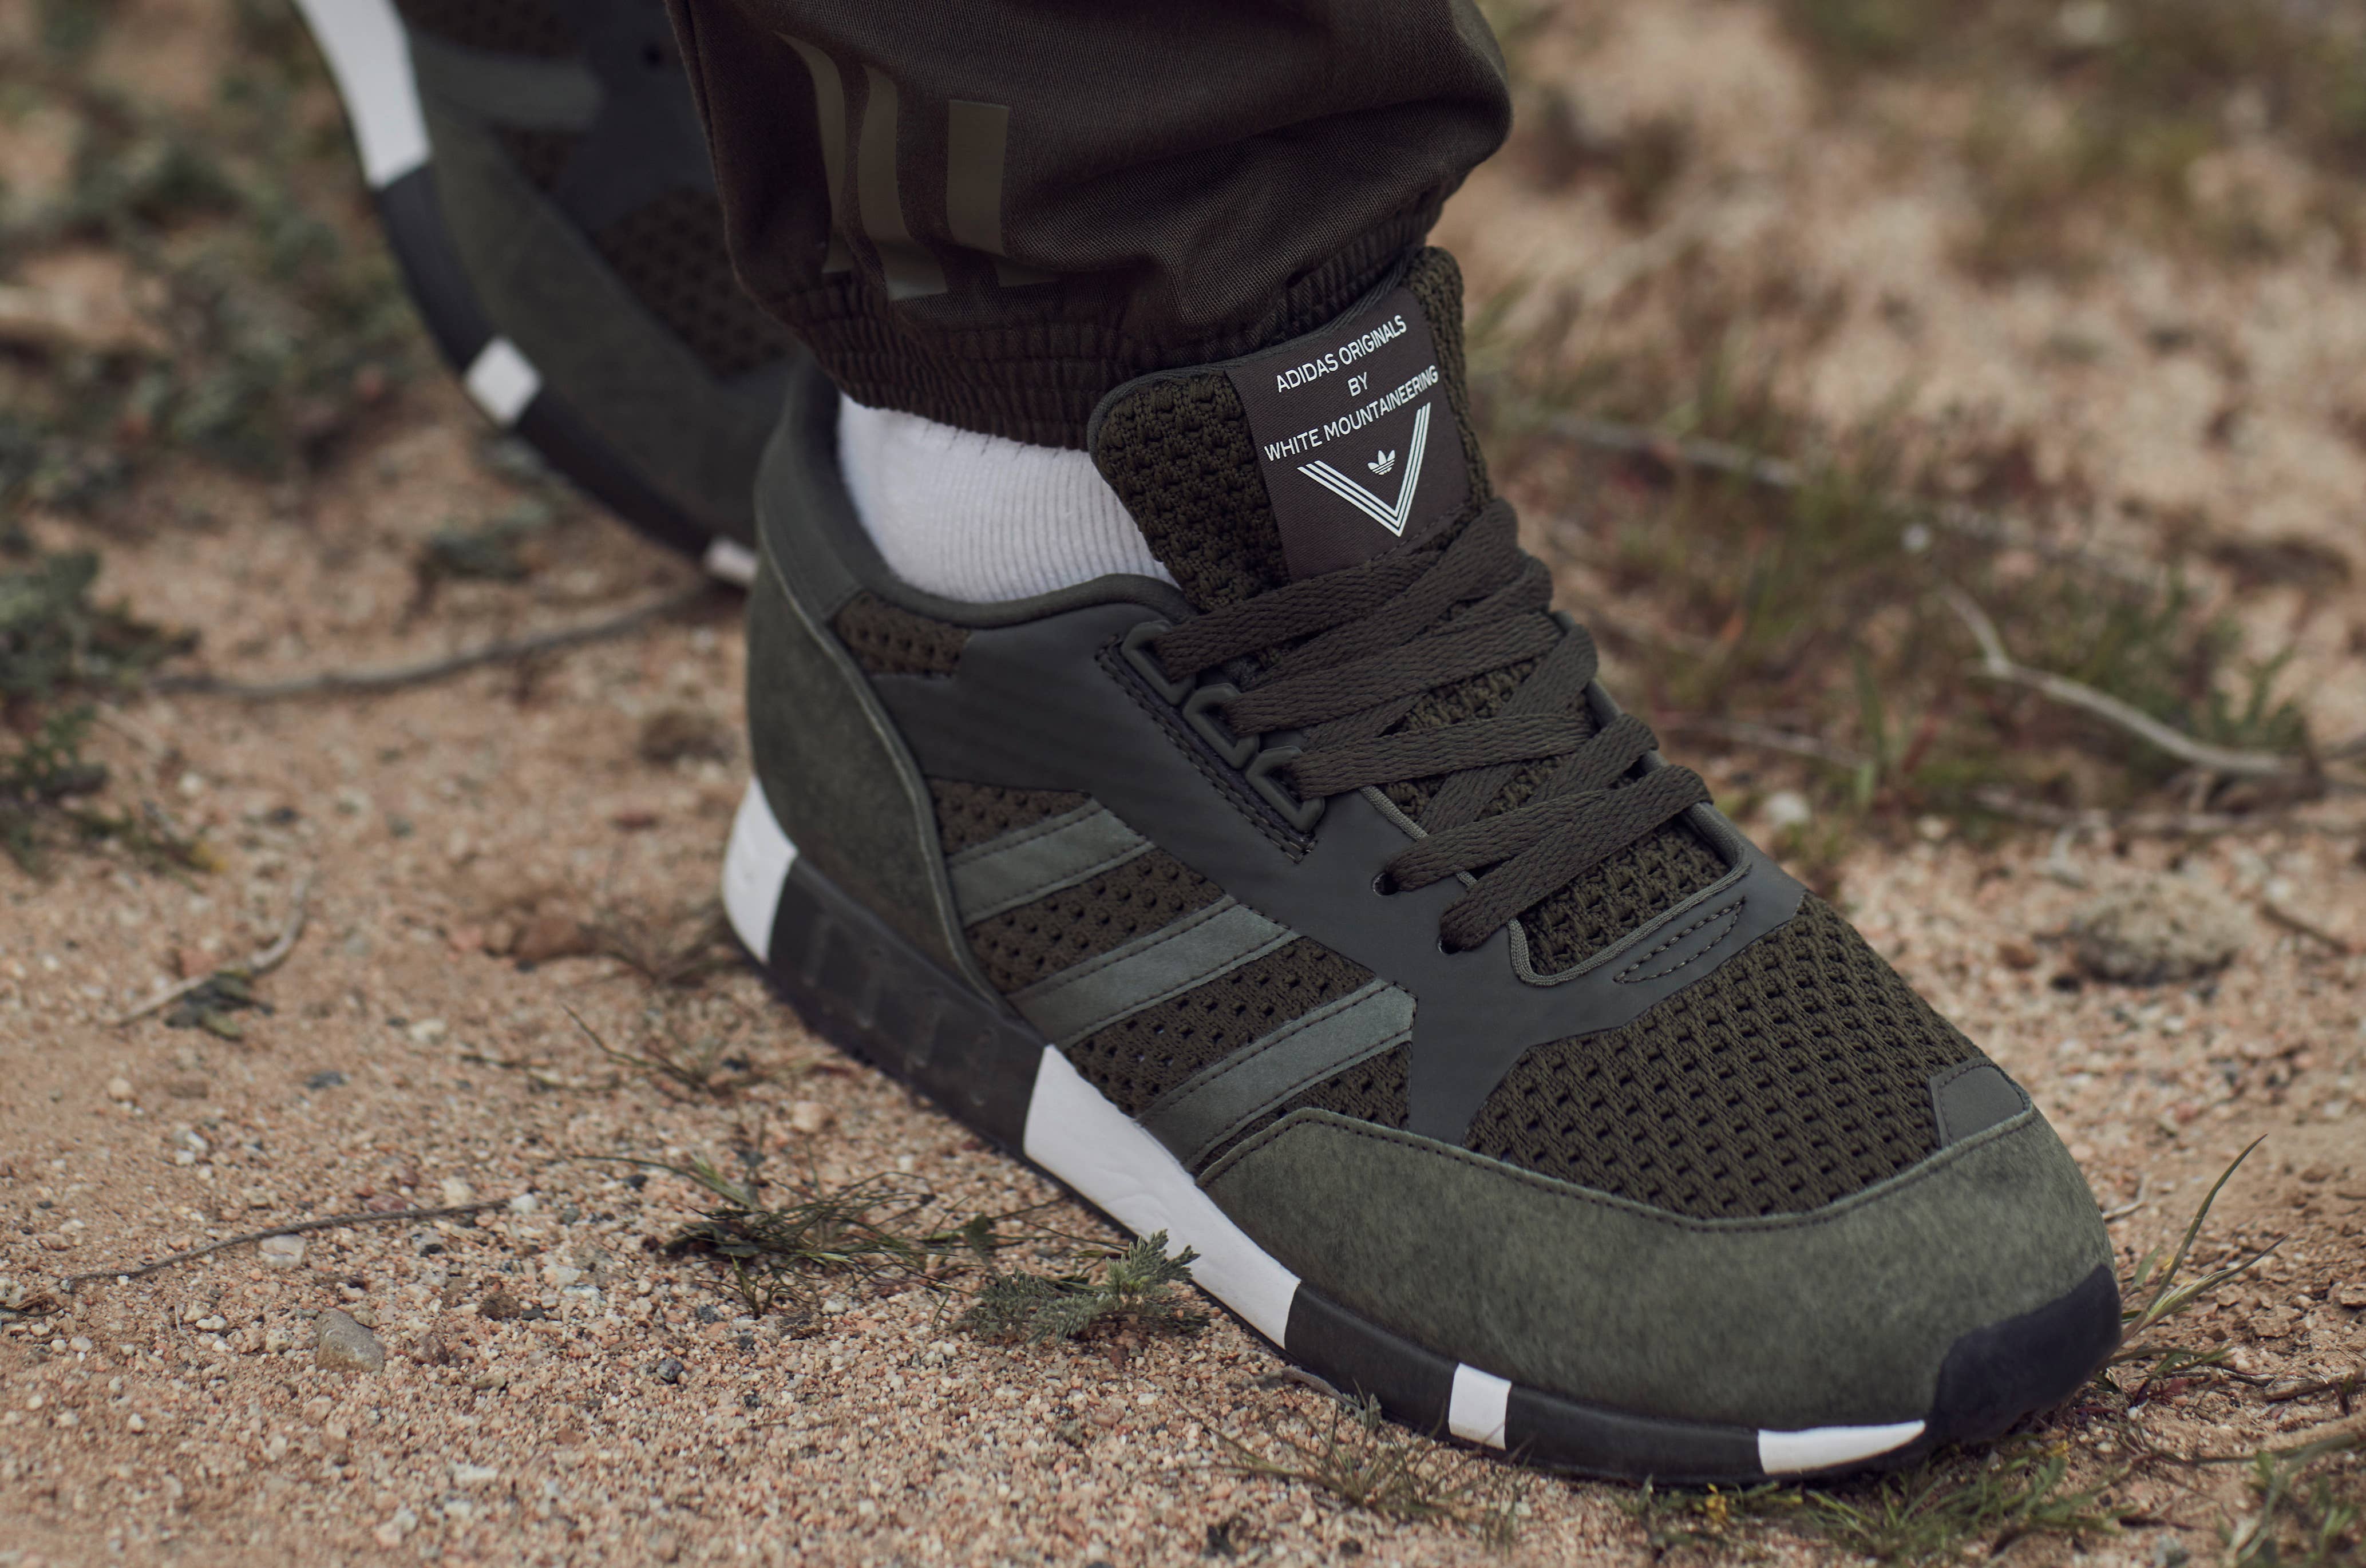 Læring glans underskud Adidas and White Mountaineering Reunite for Sneakers, Apparel | Complex